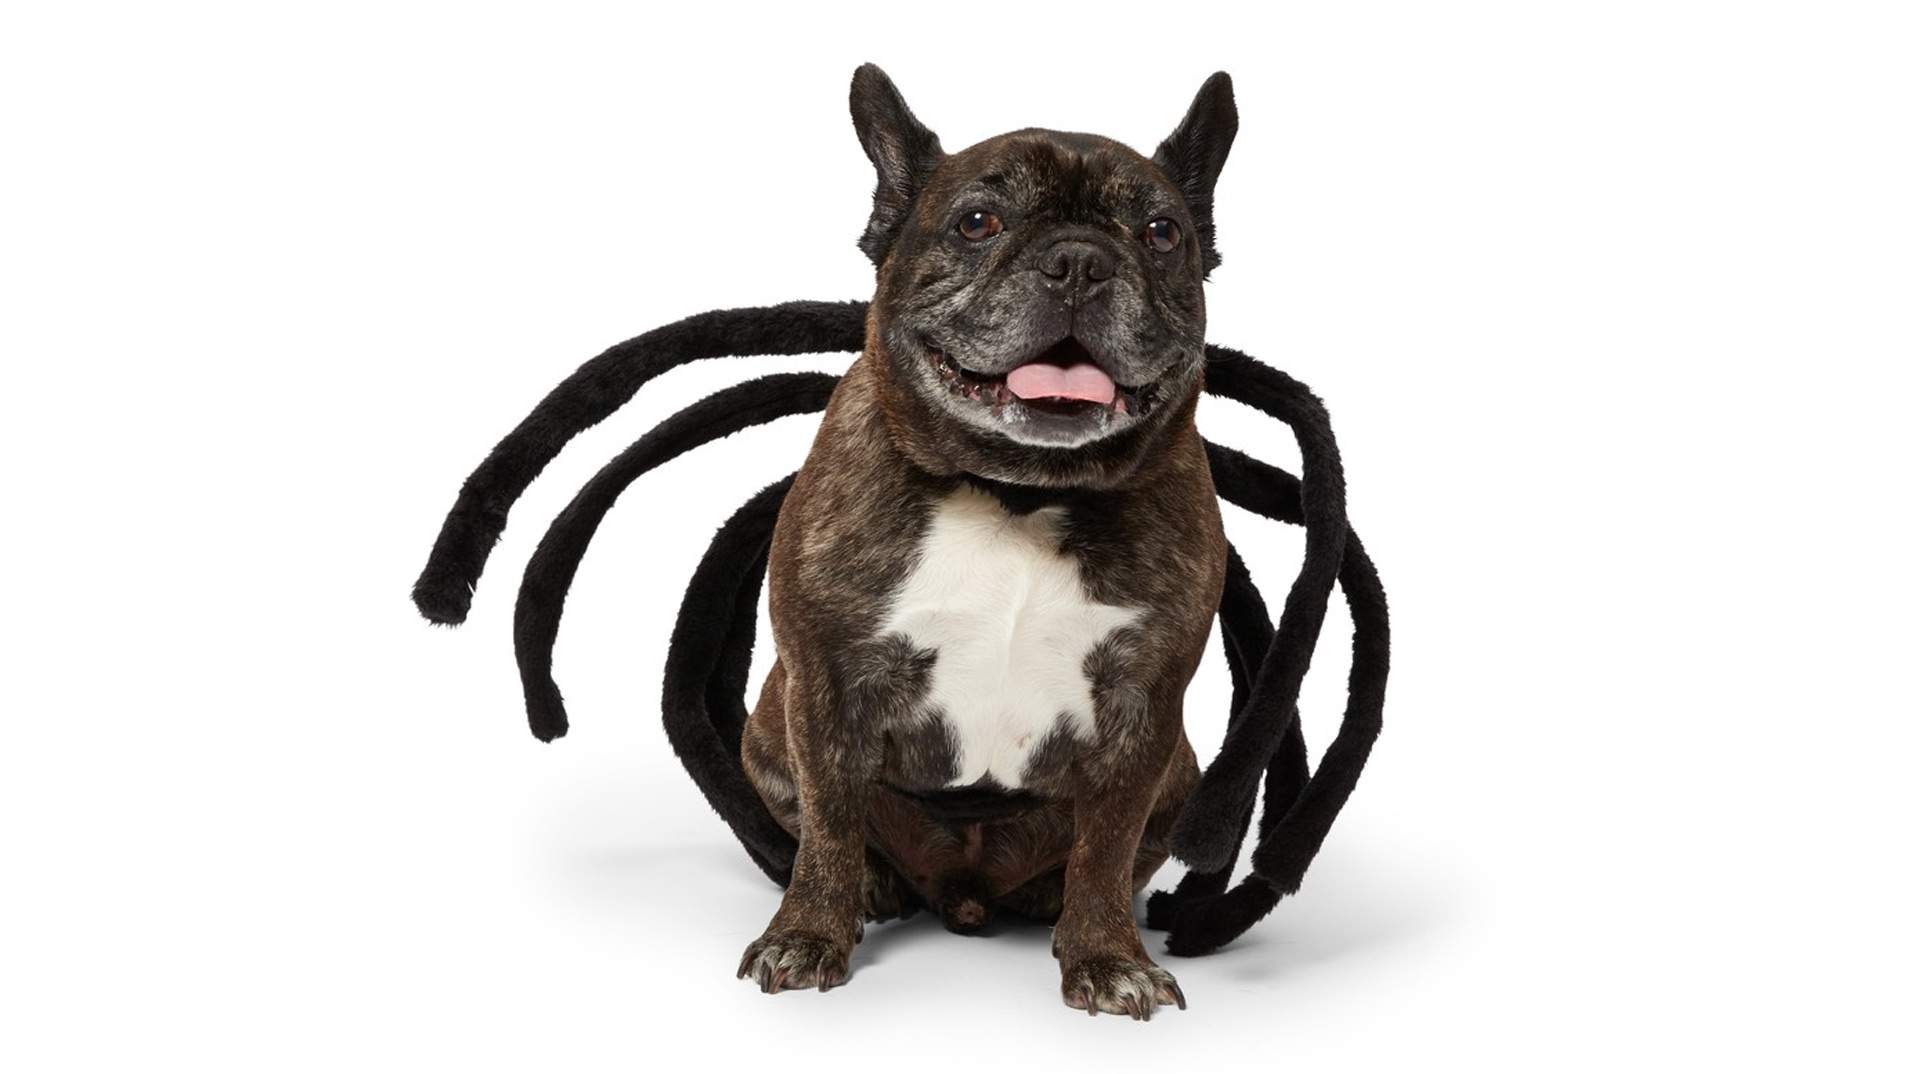 Big W Has Launched an Affordable New Range of Halloween-Themed Petwear for Hair-Raising Hounds